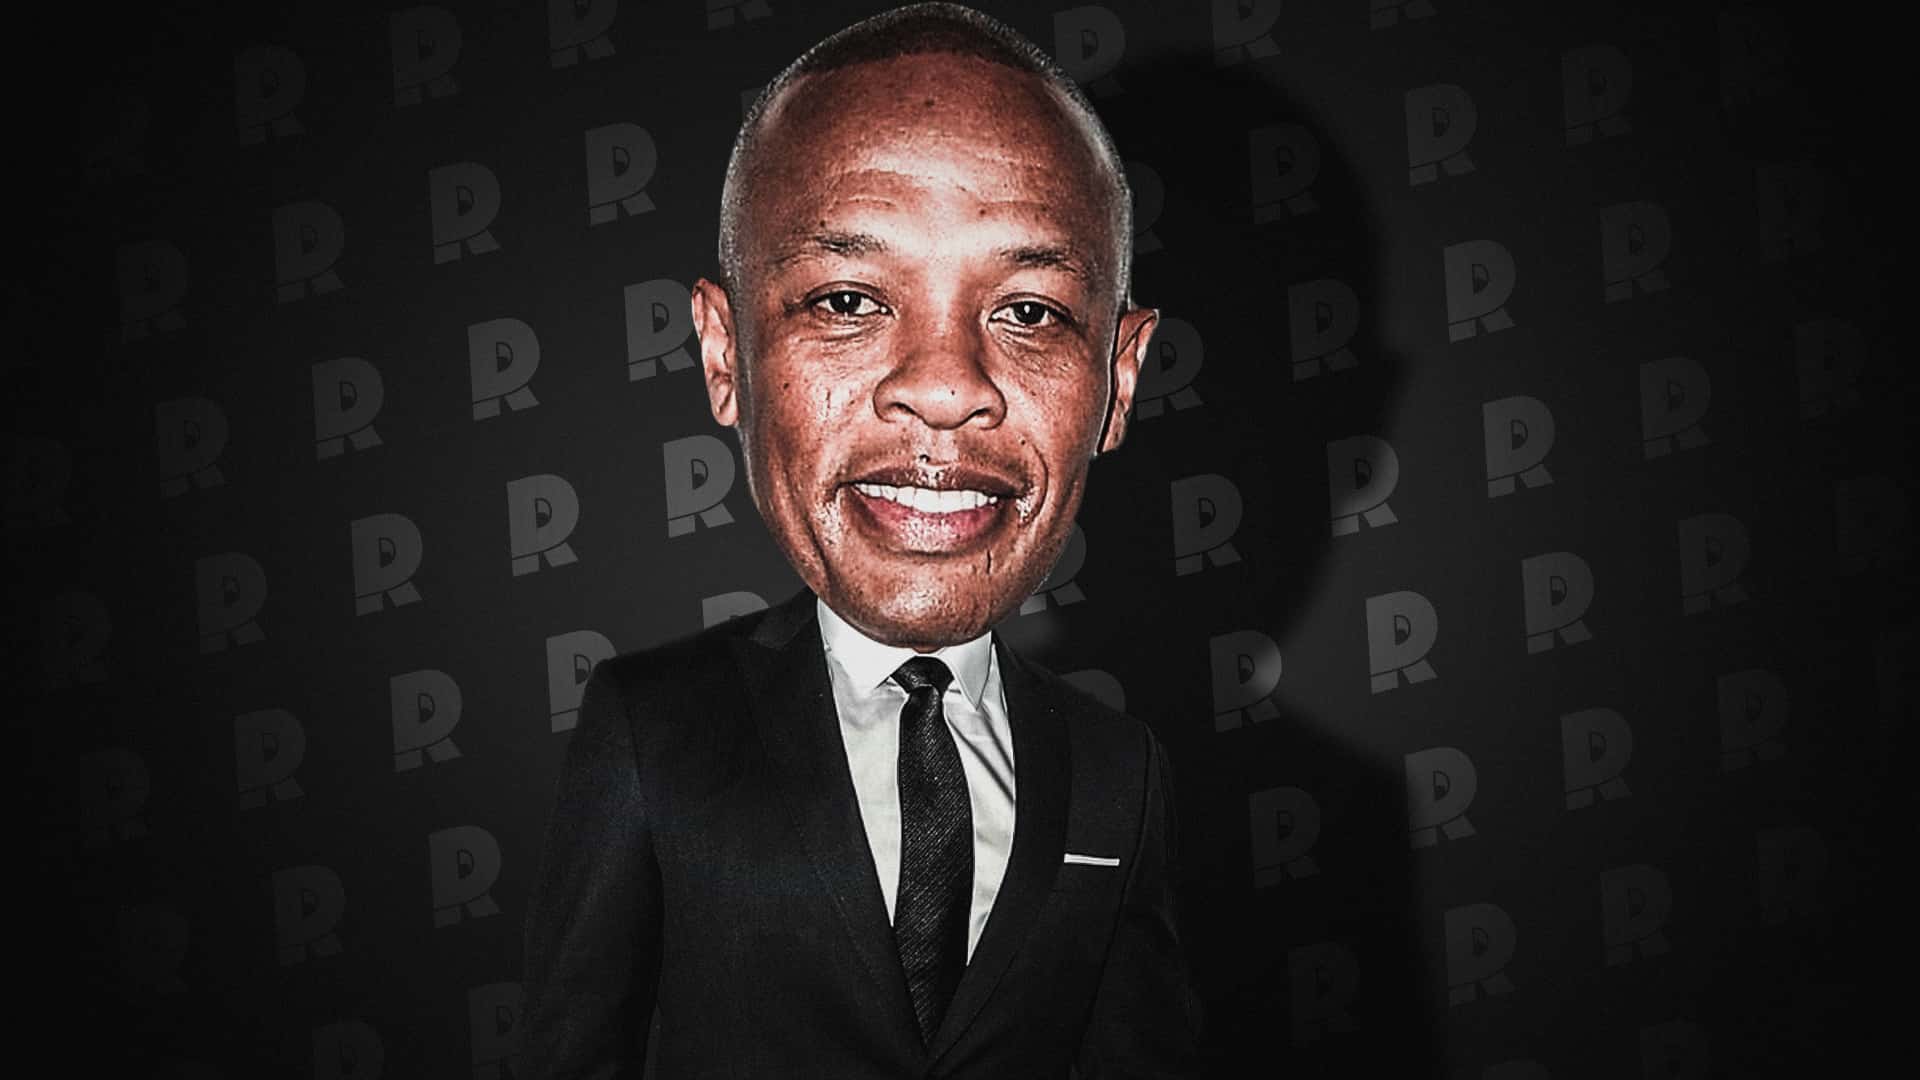 Dr Dre  Net worth $500 Million - Who Is the Richest Hip Hop Artist in the World of 2022?